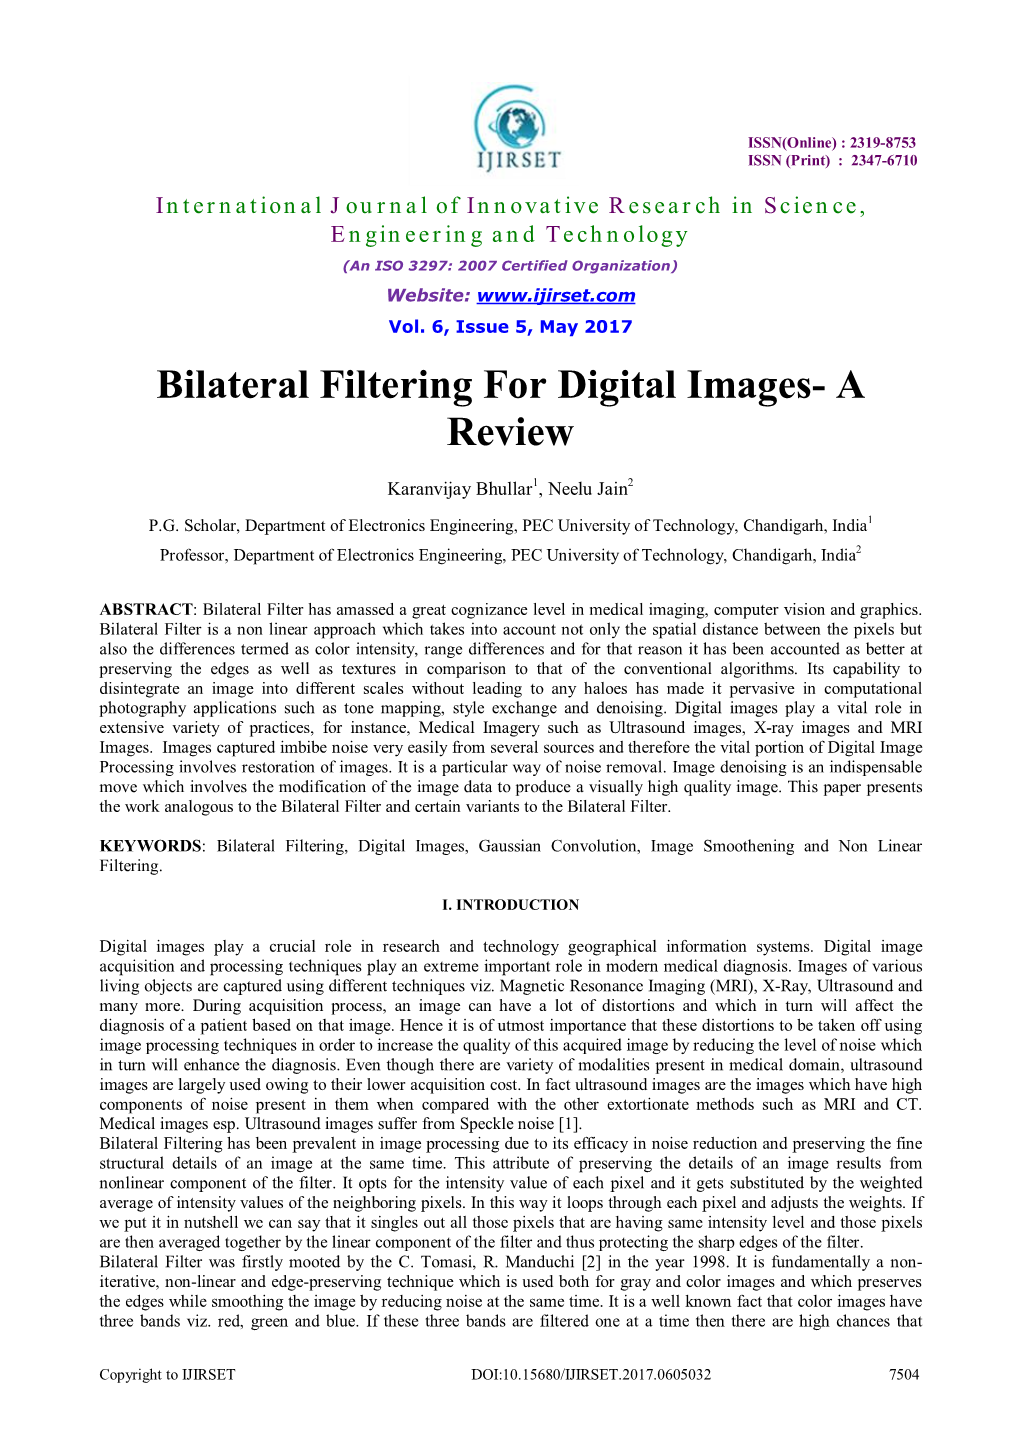 Bilateral Filtering for Digital Images- a Review